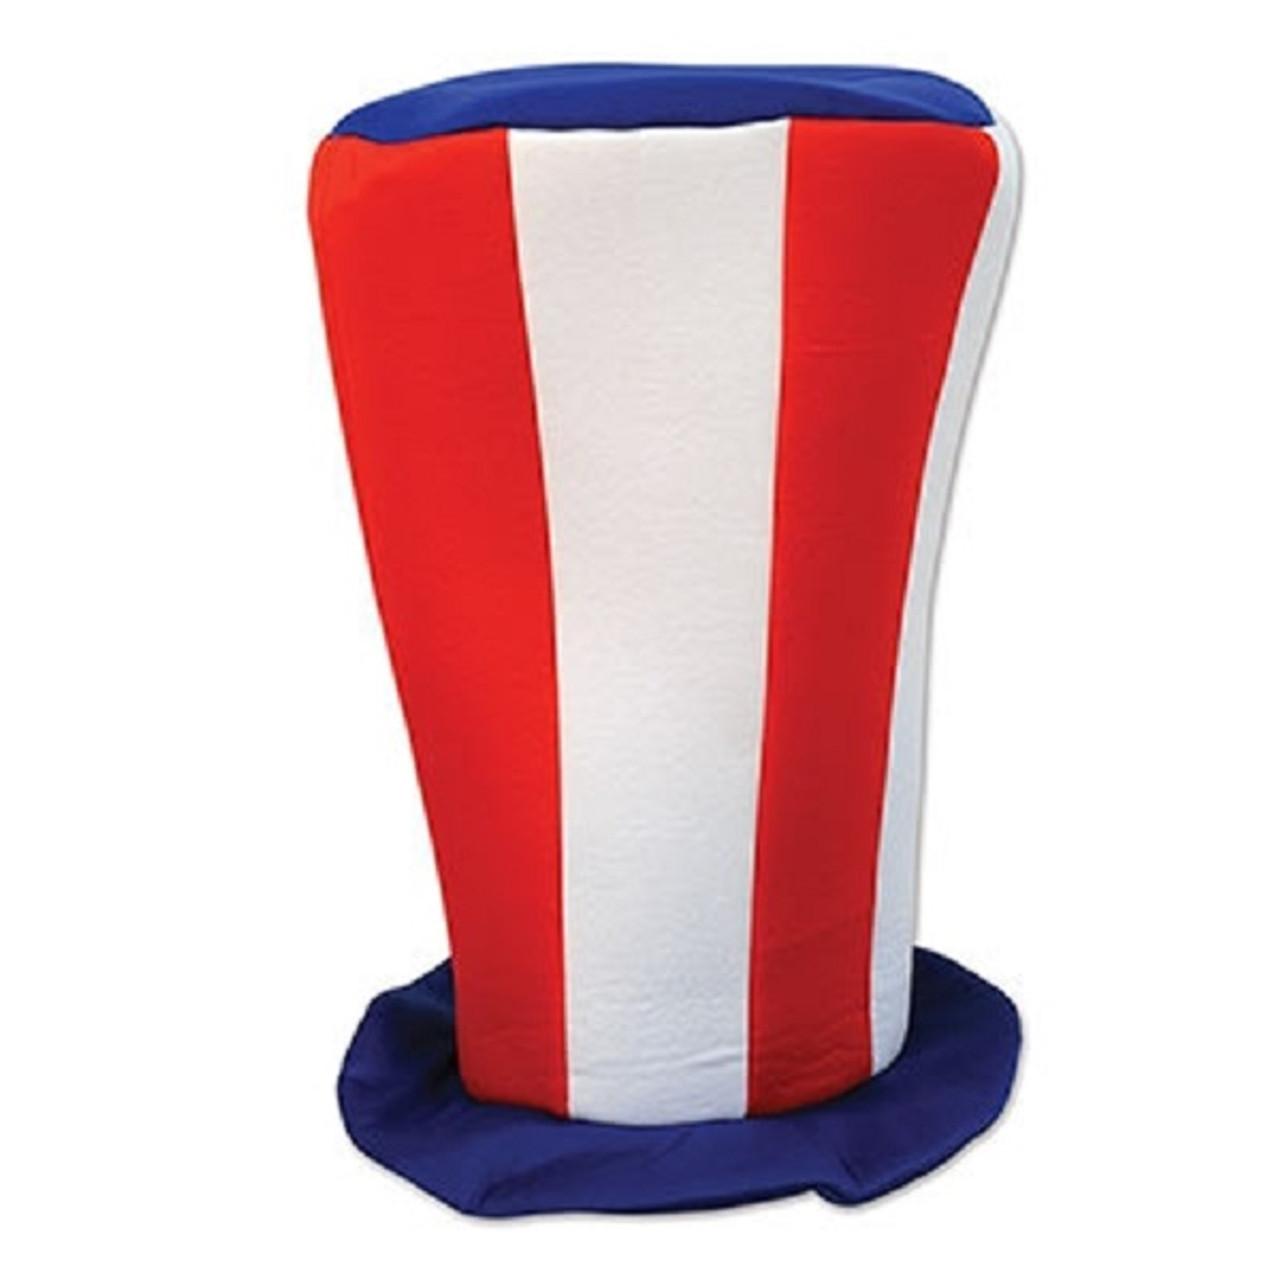 Patriotic 4th of July Party Hats - Mini Decorative Hats - 4 Count Red Blue